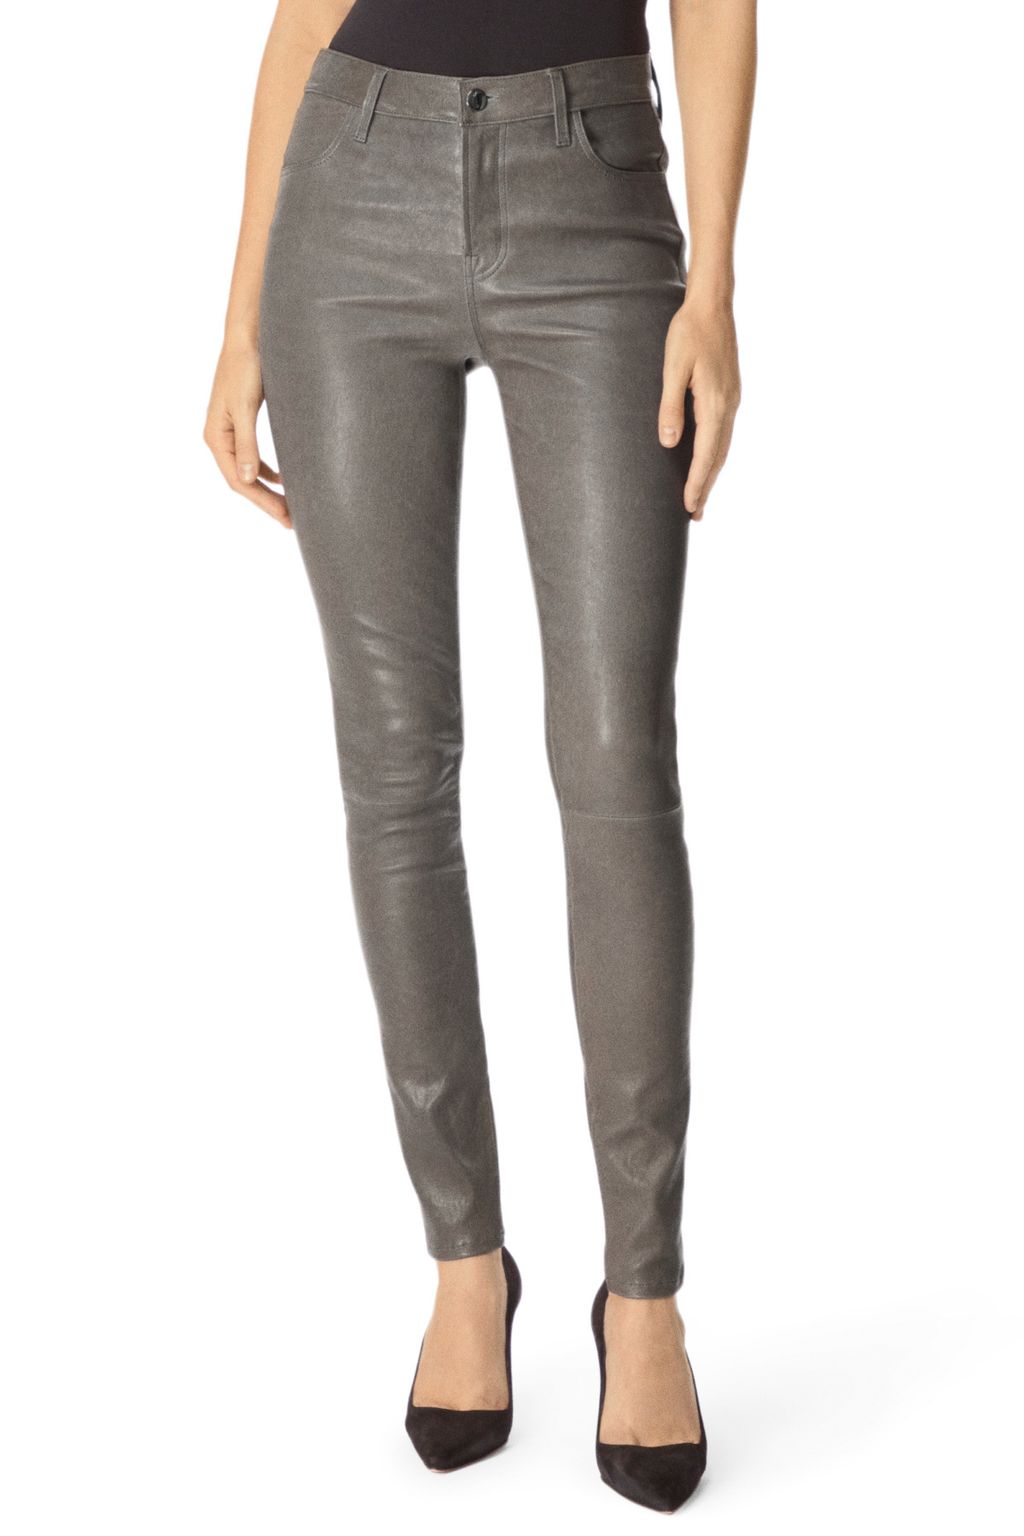 The 11 Best Brown Leather Pants for Women | Who What Wear